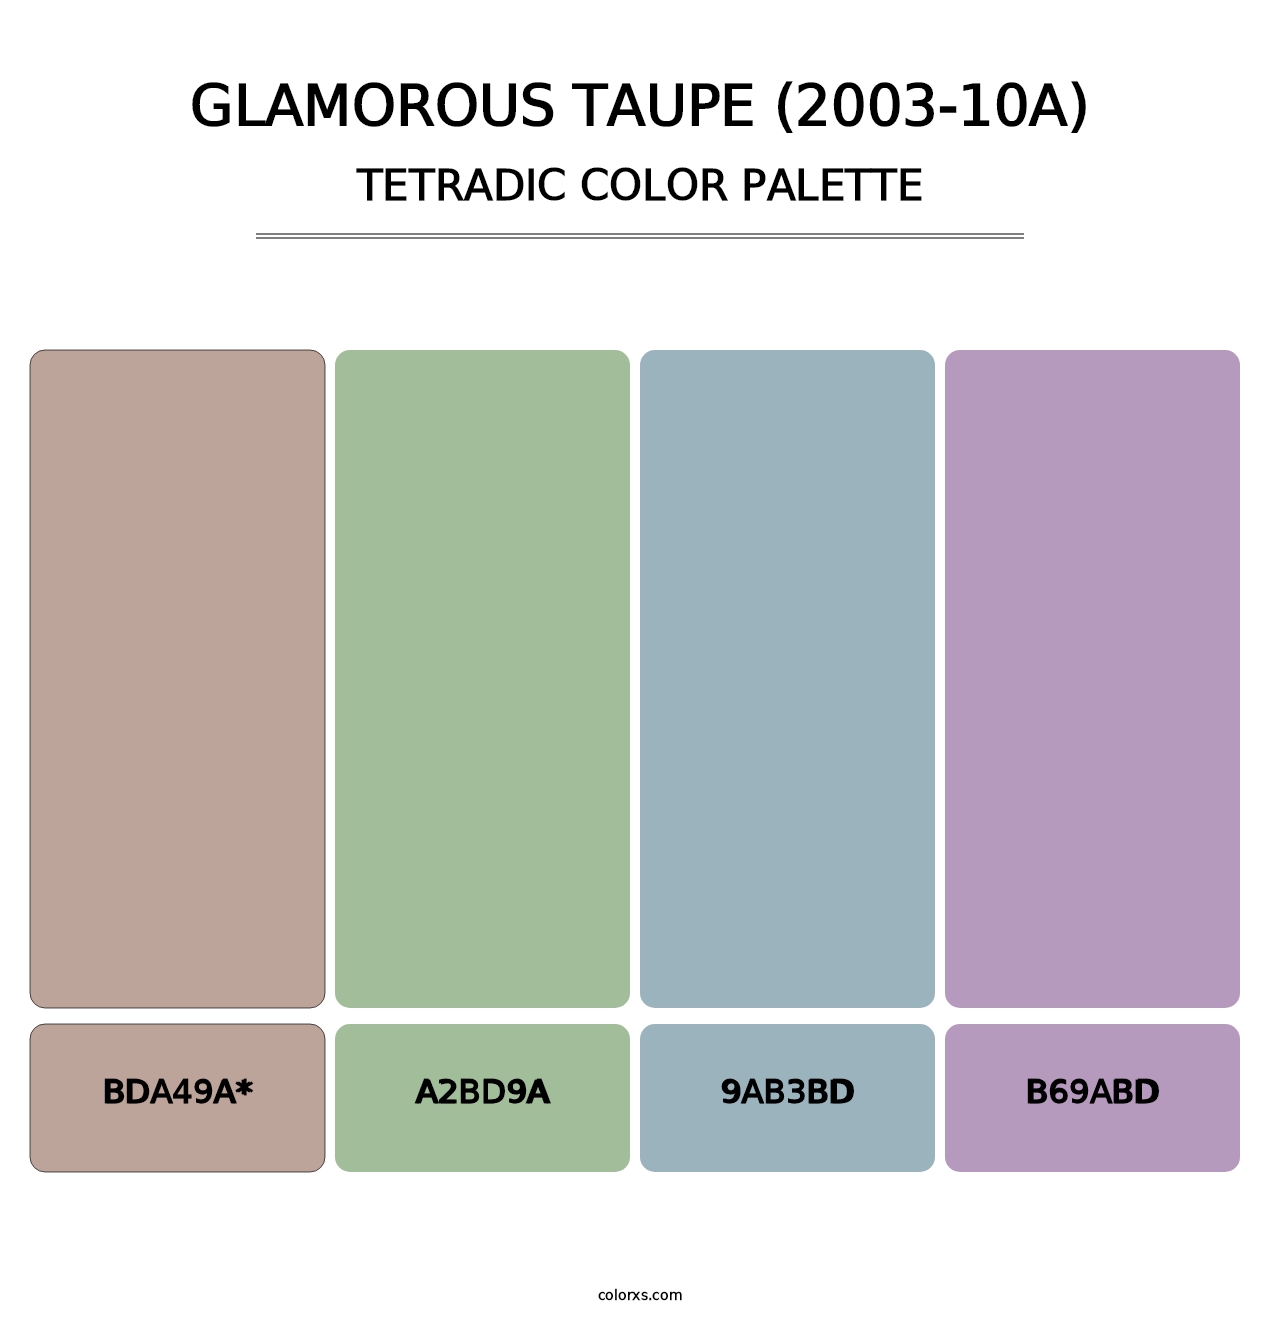 Glamorous Taupe (2003-10A) - Tetradic Color Palette